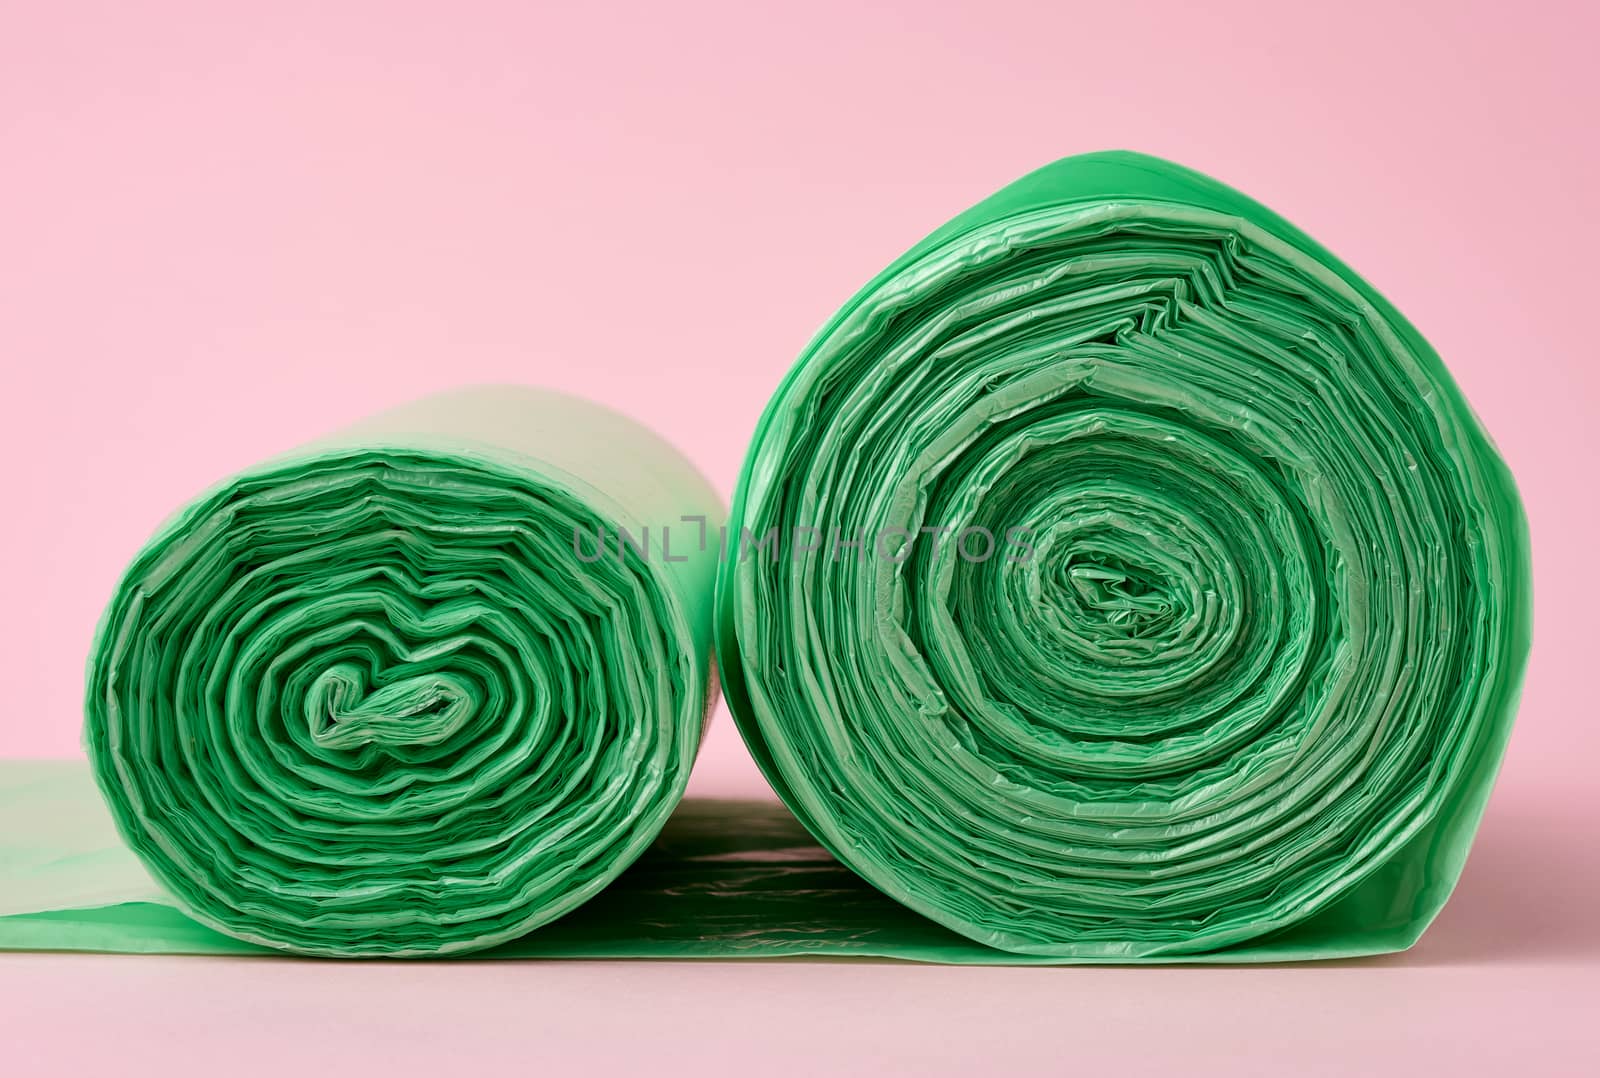 two rolls green plastic bags for trash bin on pink background, close up